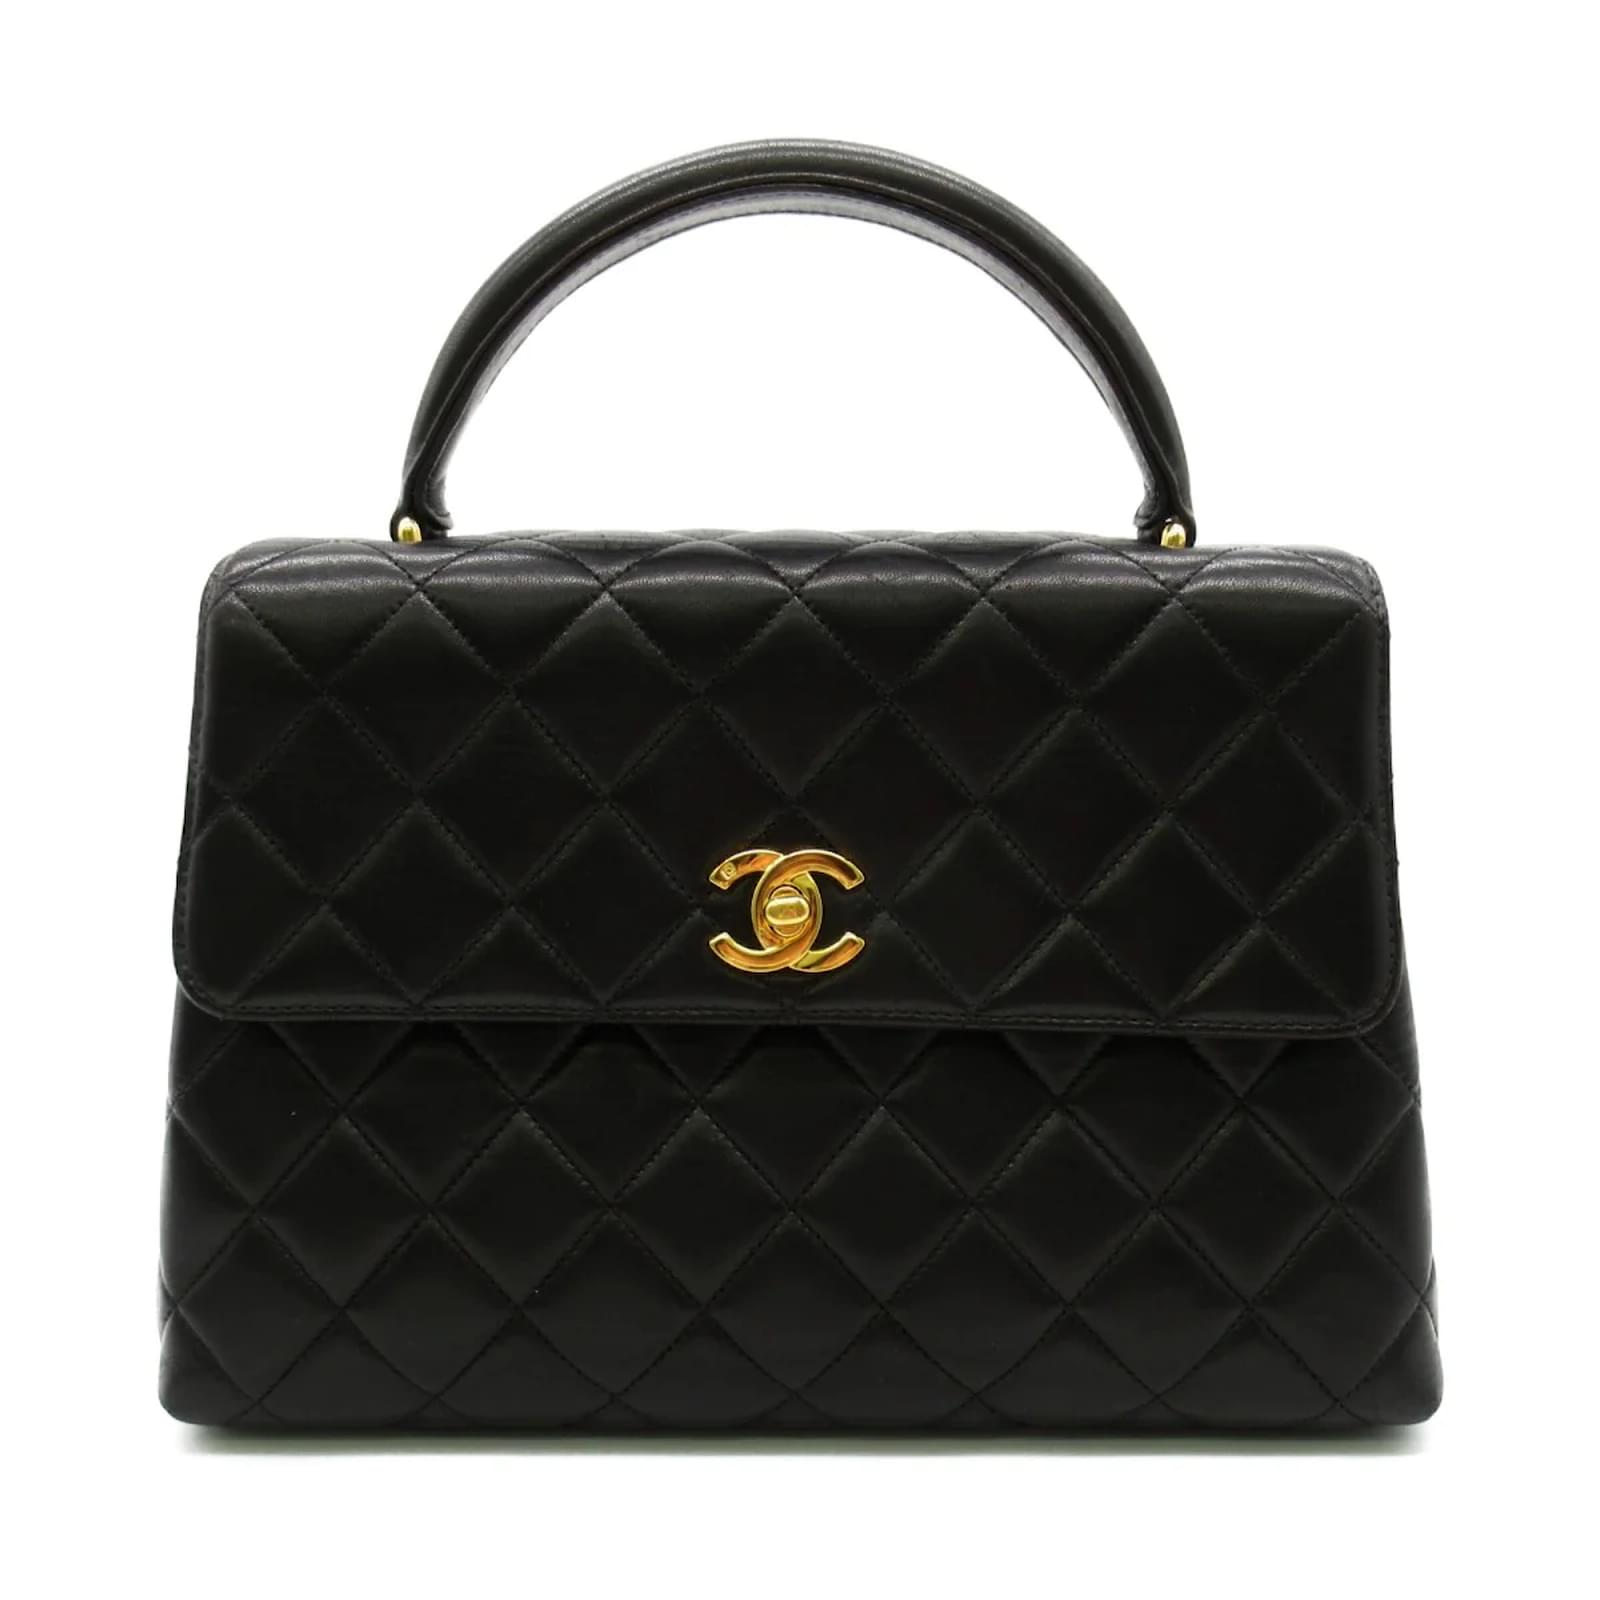 Chanel Vintage Quilted Kelly Top Handle Bag Lambskin Black Small Bag 